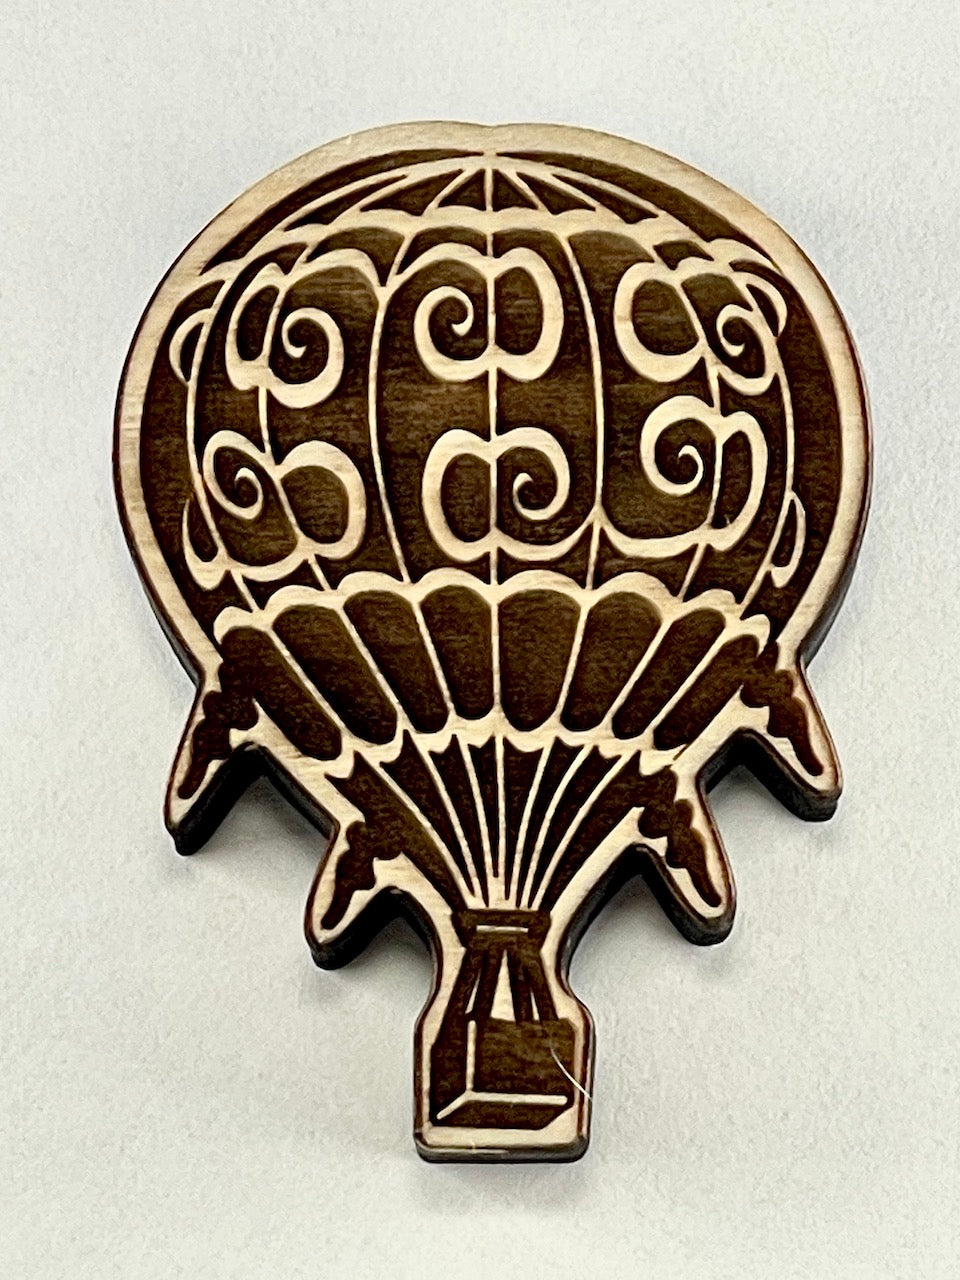 Hot Air Balloon (Clouds) small- Stamp